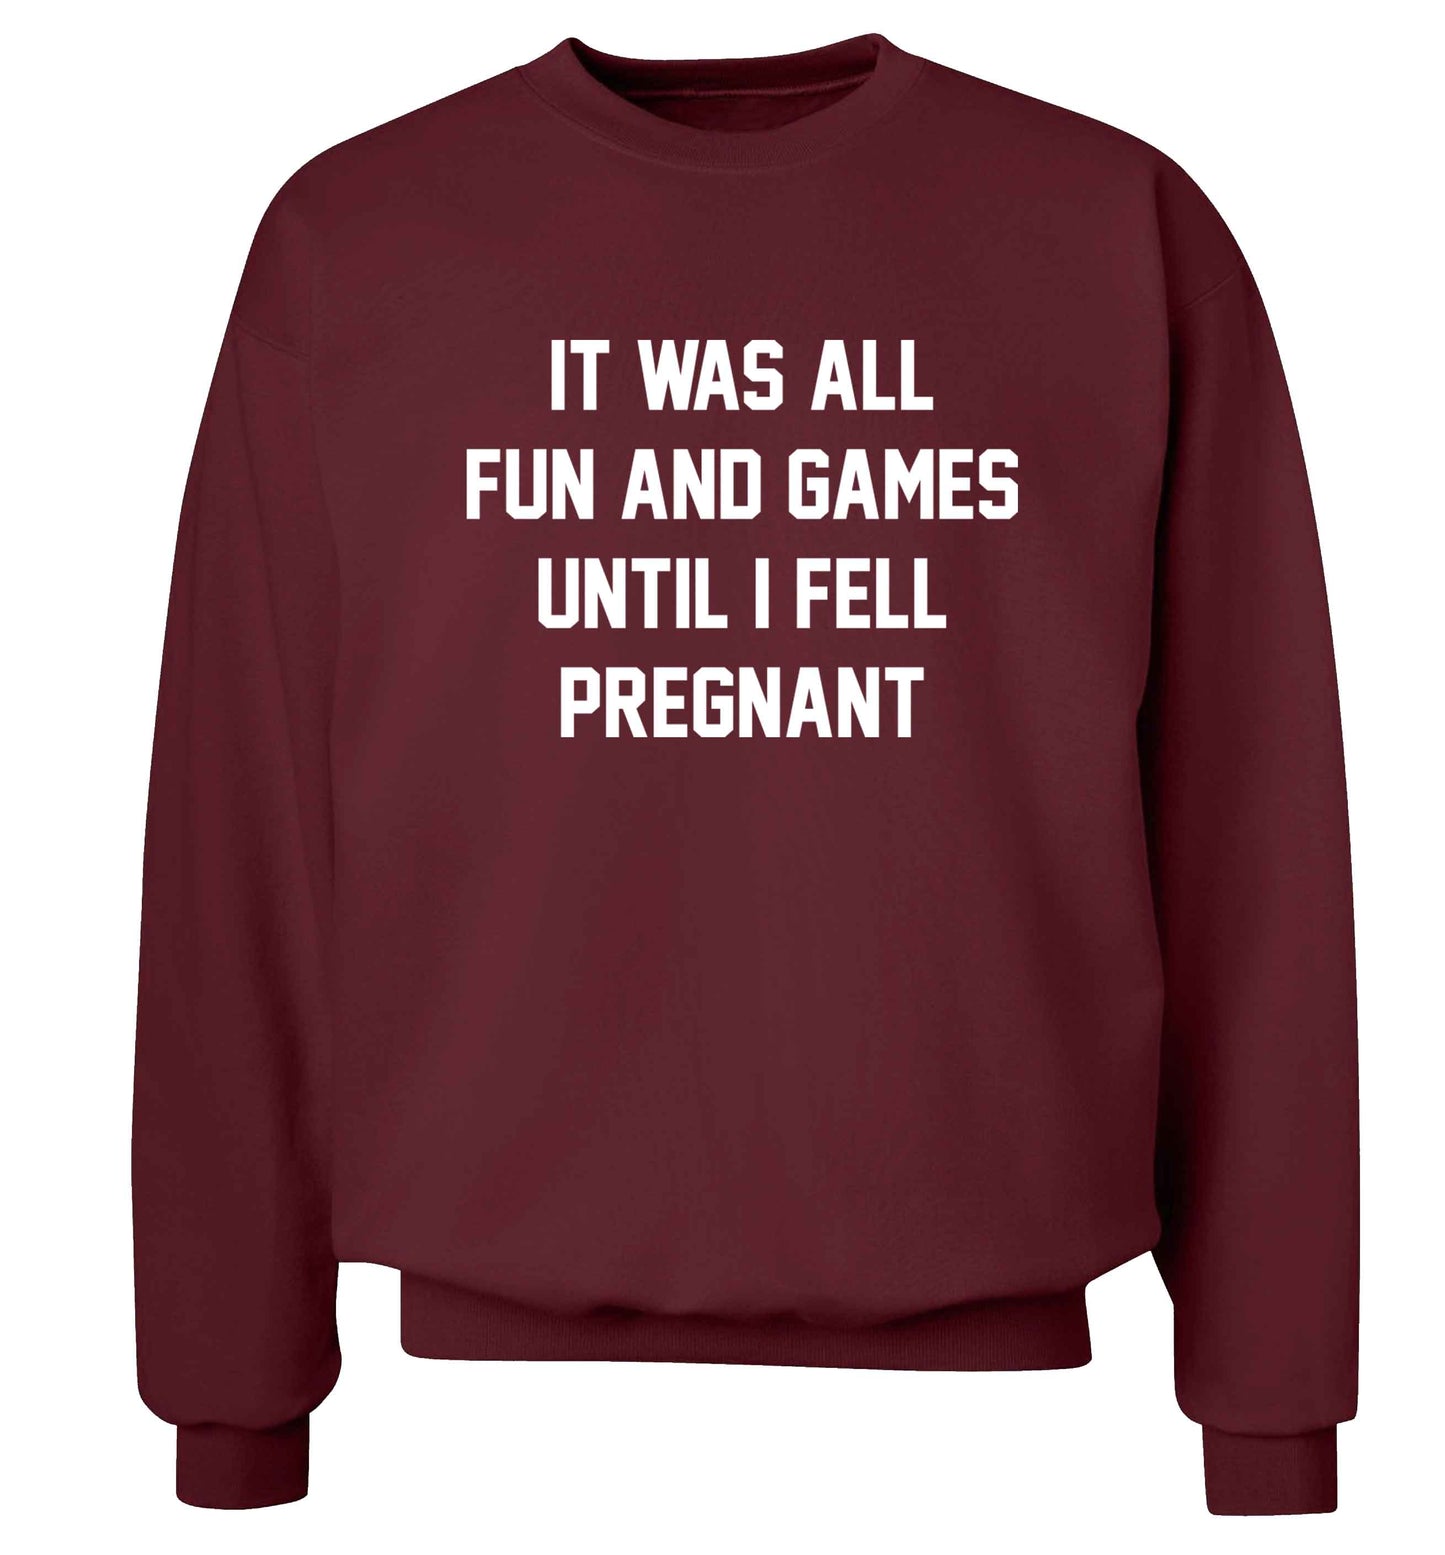 It was all fun and games until I fell pregnant kicks Adult's unisex maroon Sweater 2XL